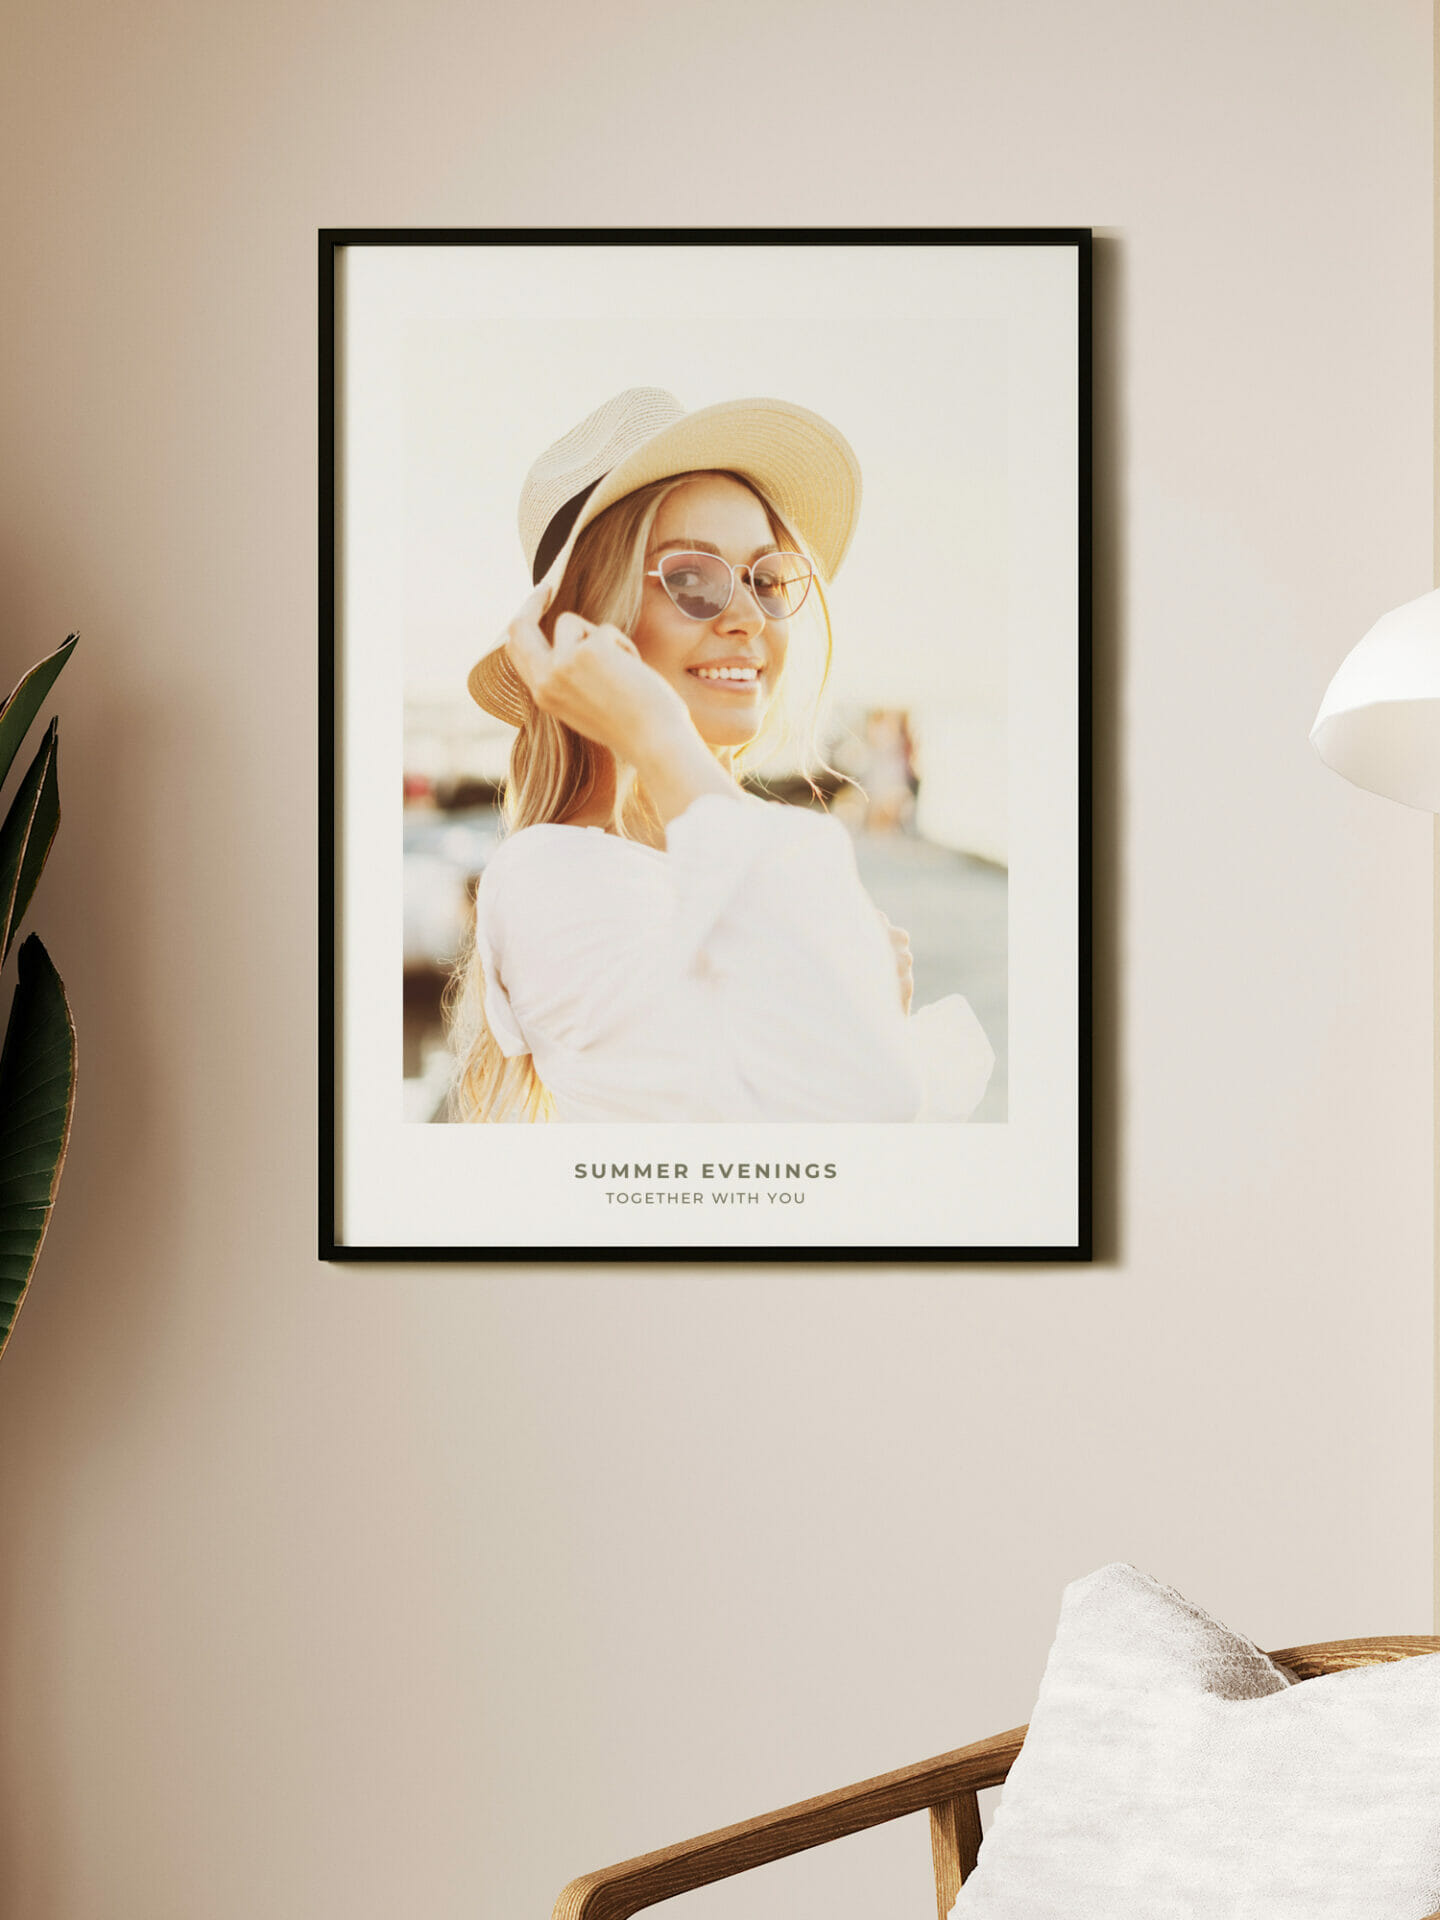 Poster of woman in hat and sunglasses in interior